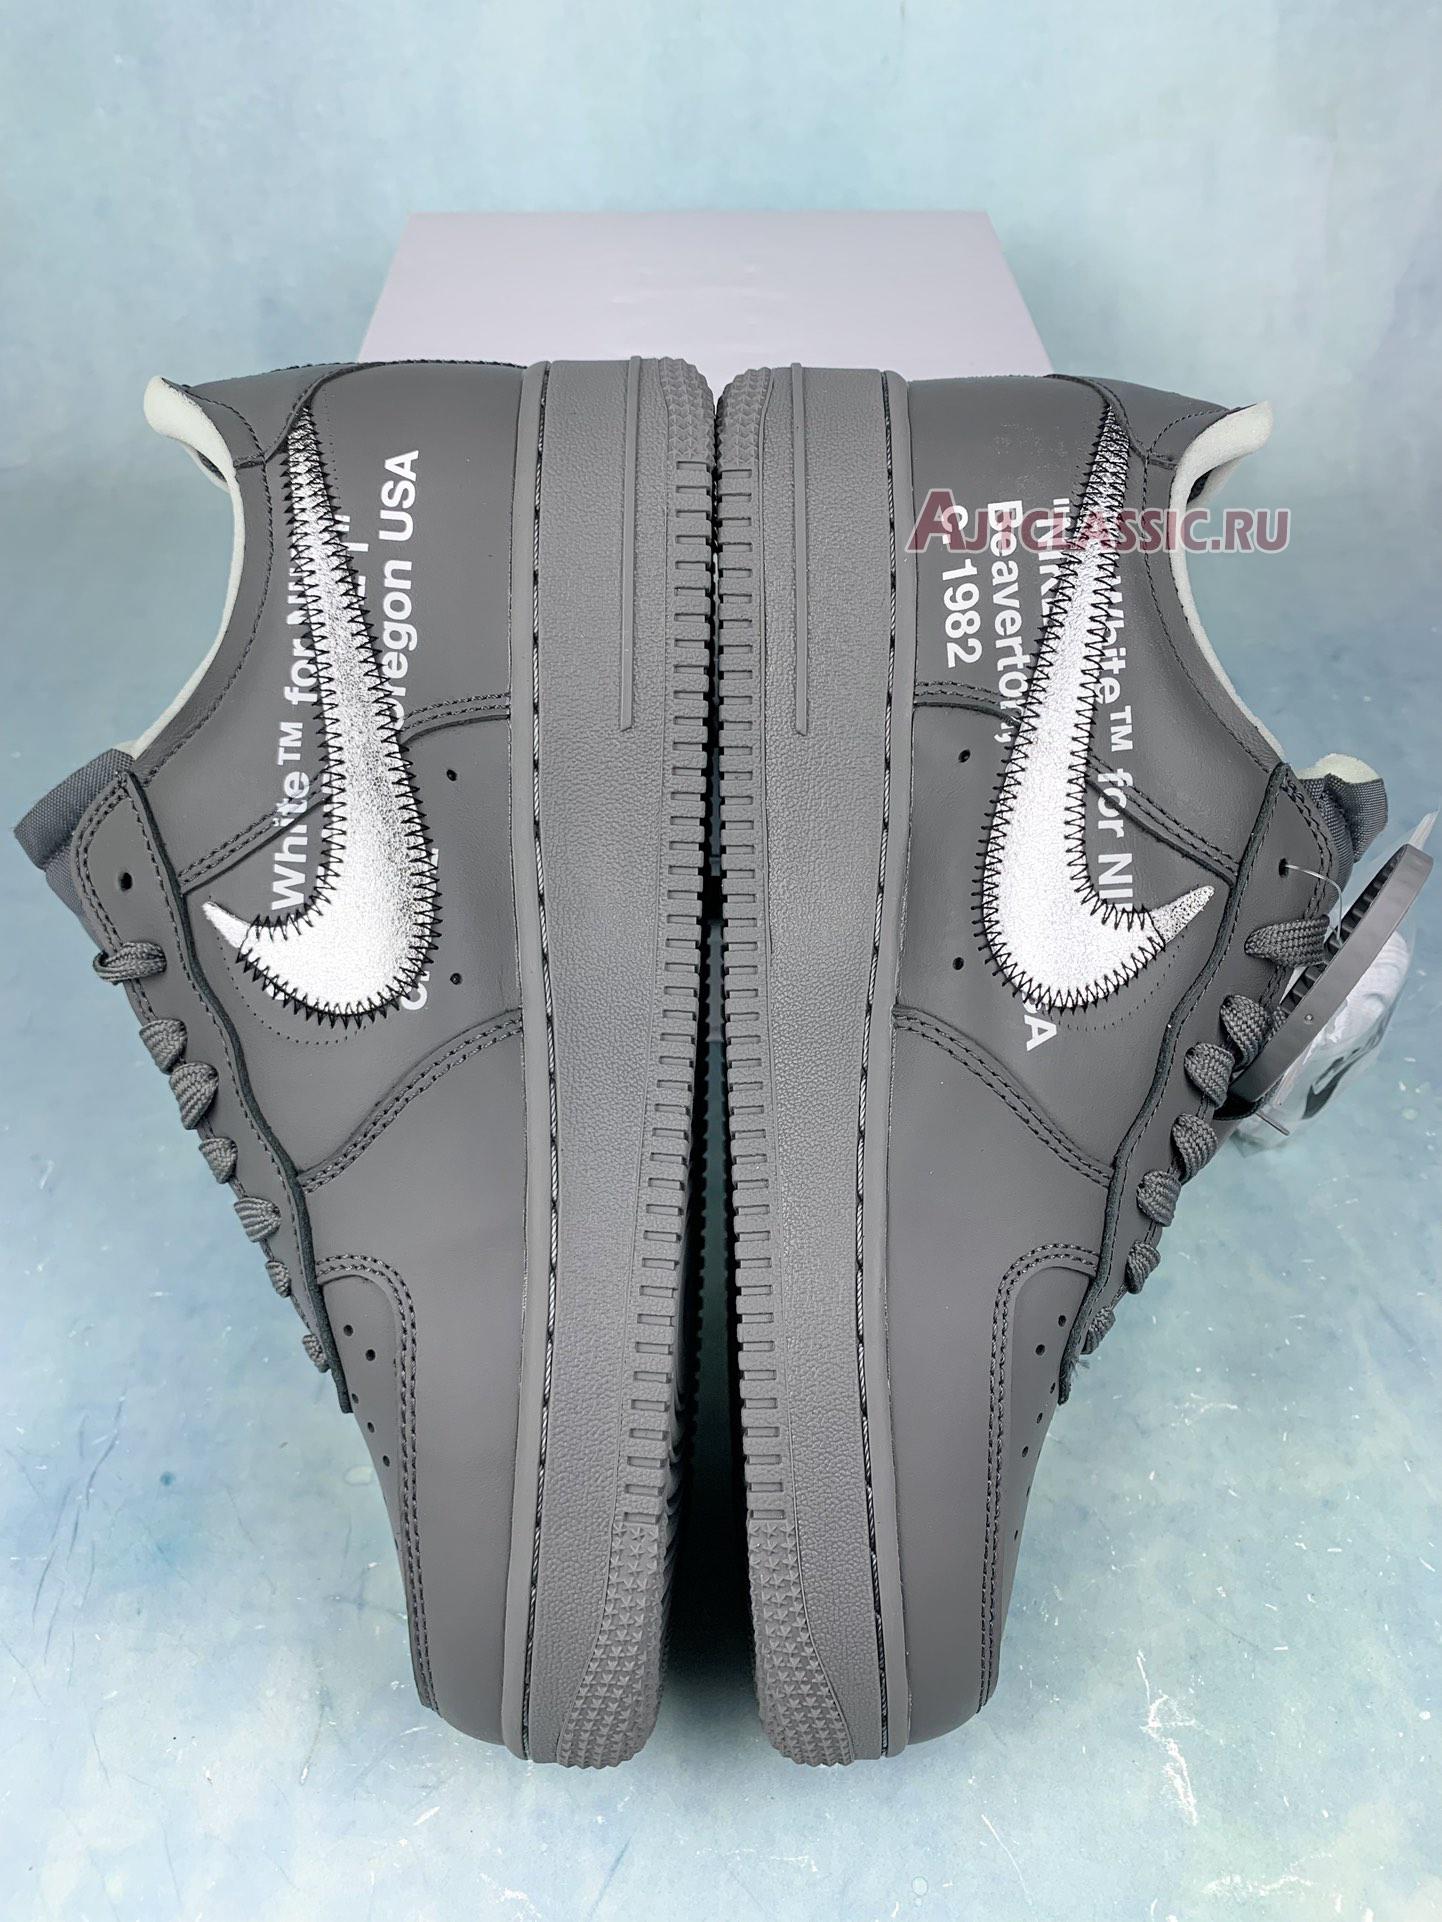 Off-White x Nike Air Force 1 Low "Ghost Grey" DX1419-500